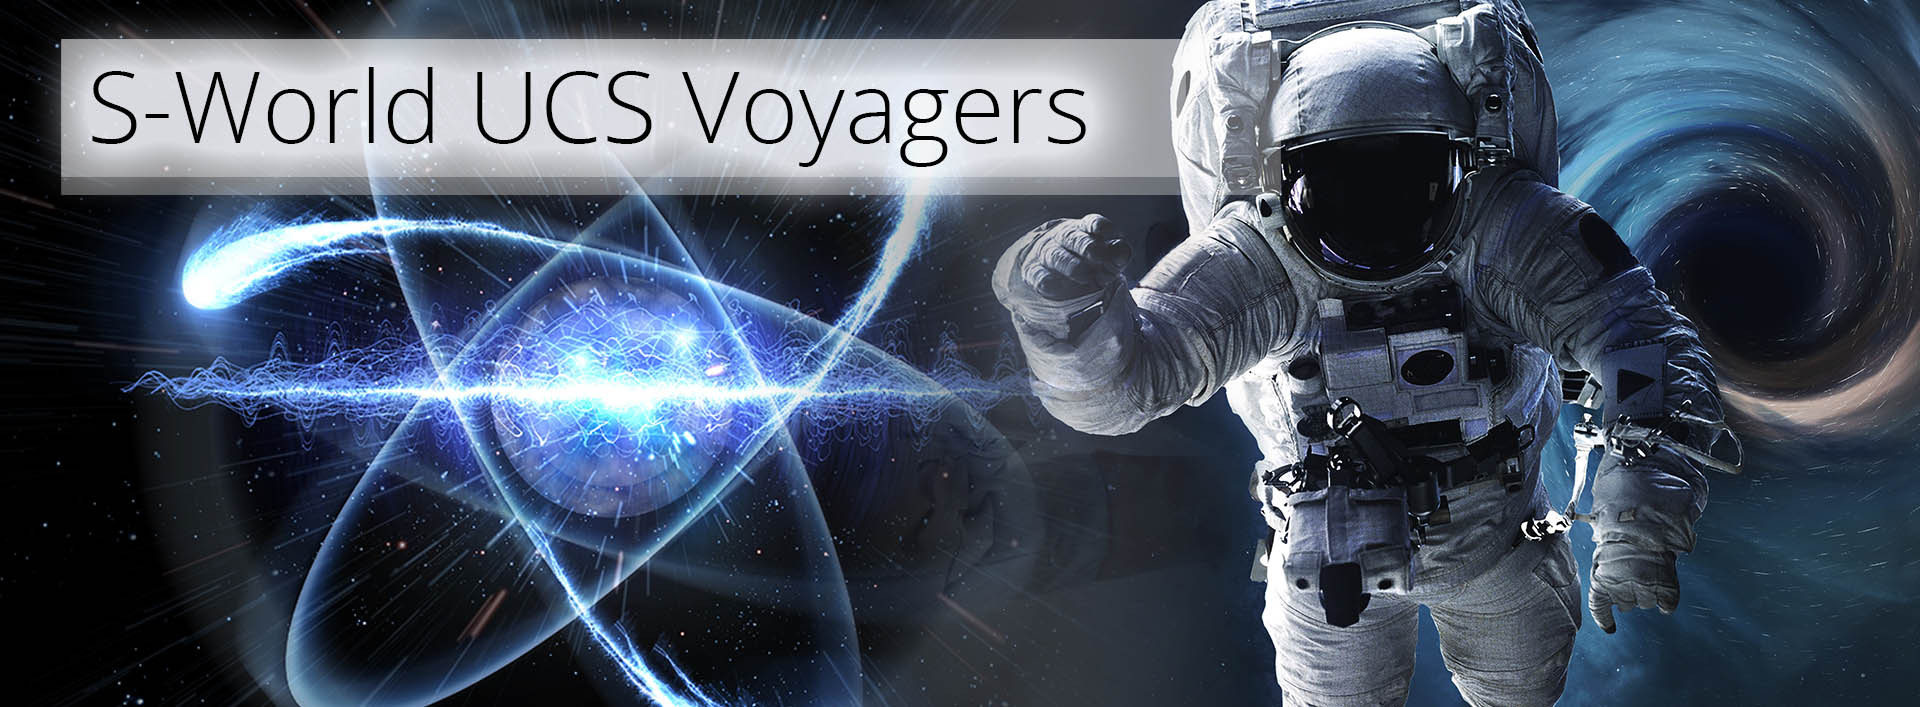 s-world ucs voyagers an economic theory of everything